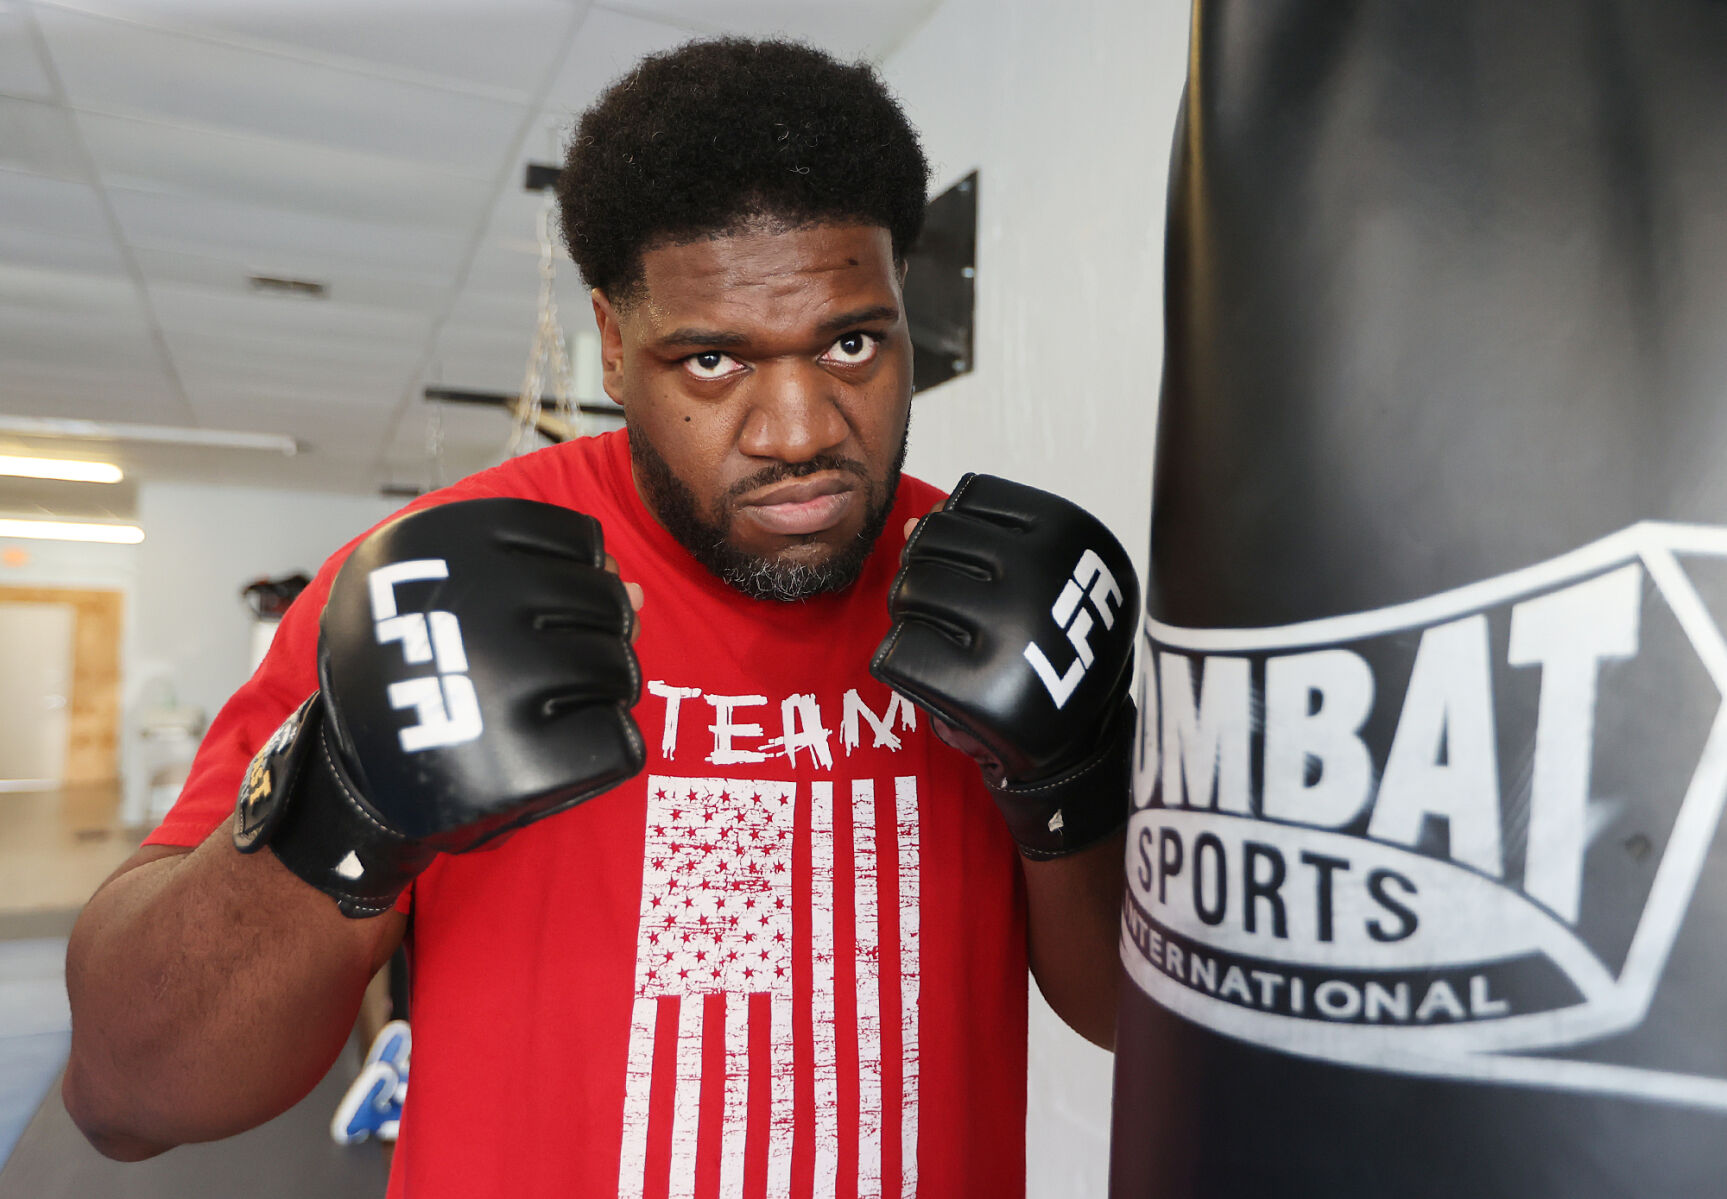 Waco-bred MMA fighter Vernon Lewis plans to put vise grip on heavyweight title pic